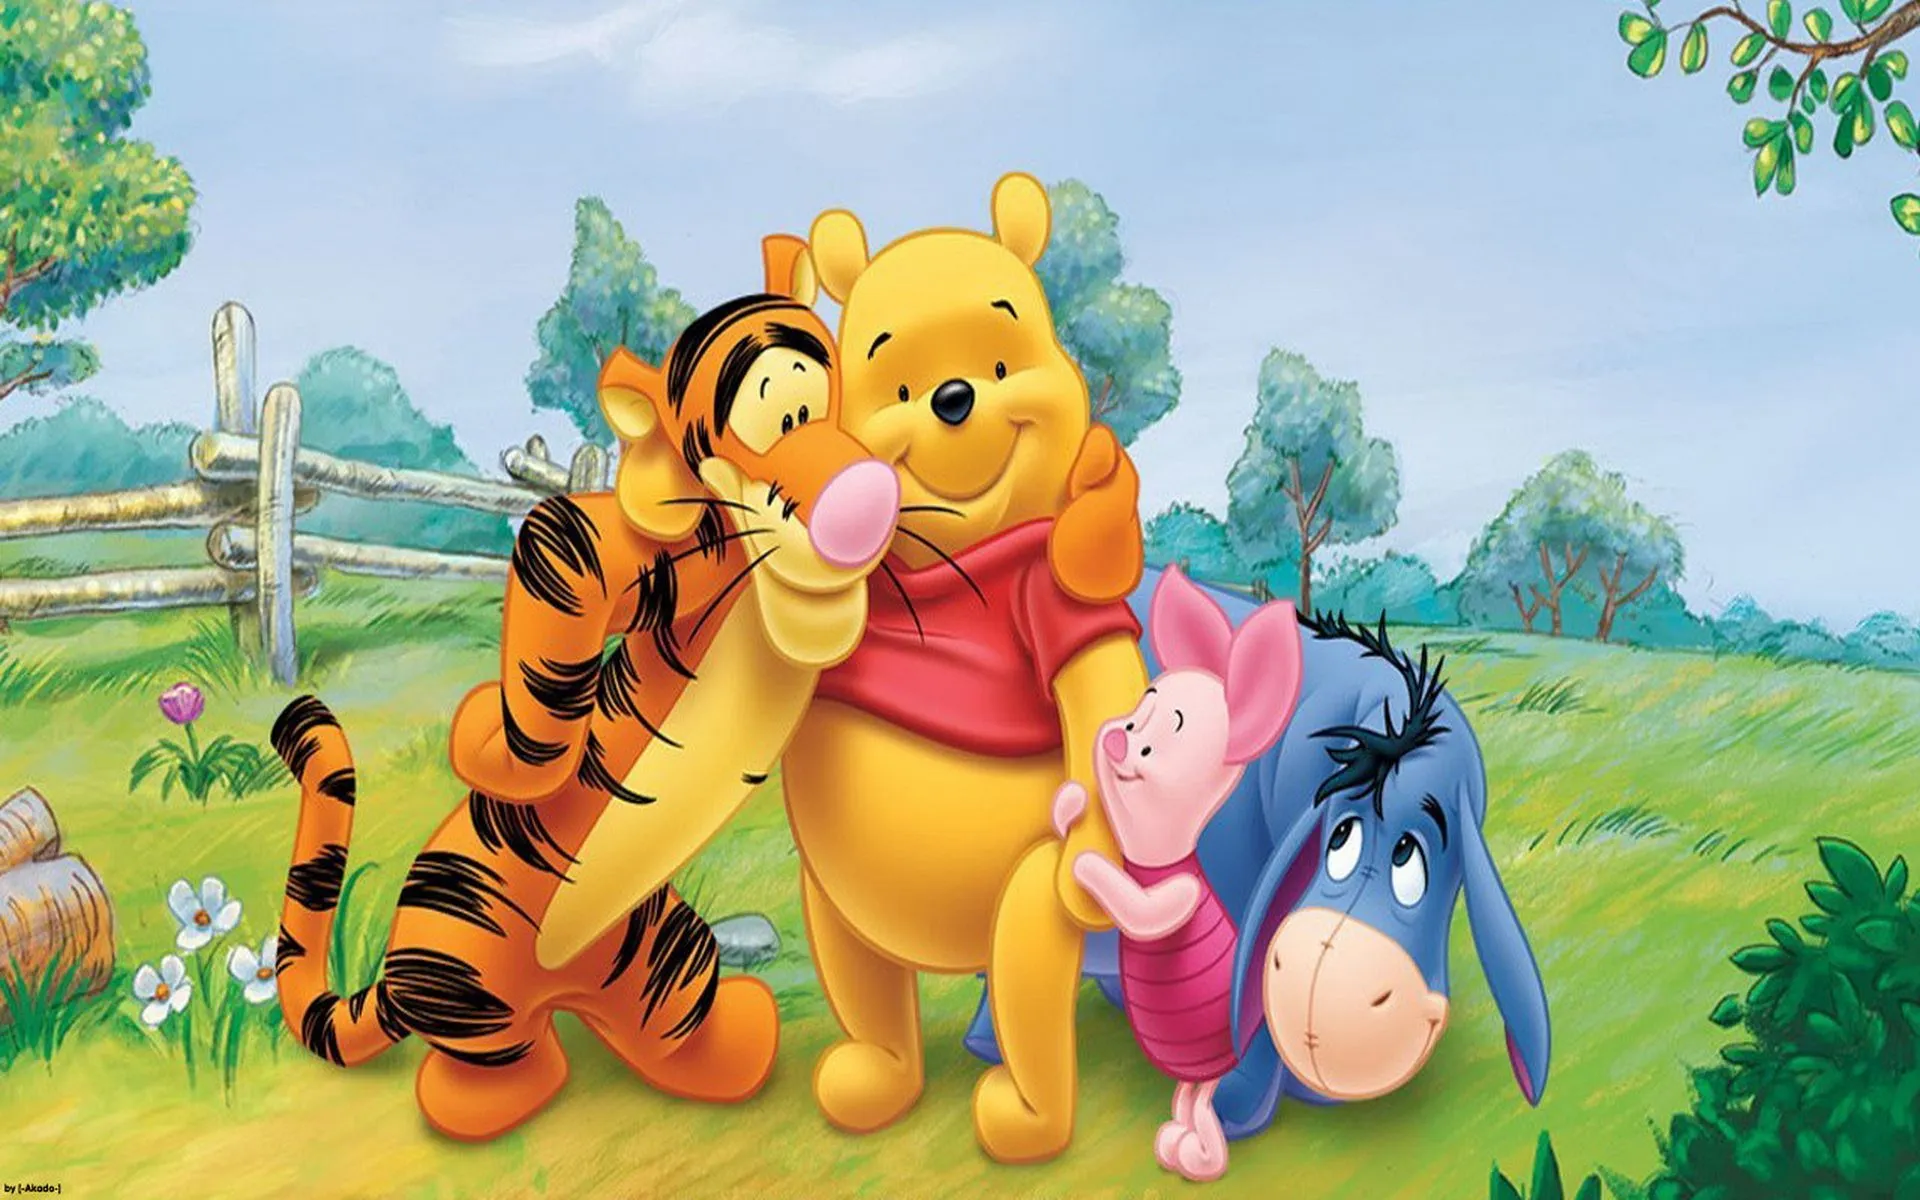 83 Winnie The Pooh Wallpapers | Winnie The Pooh Backgrounds